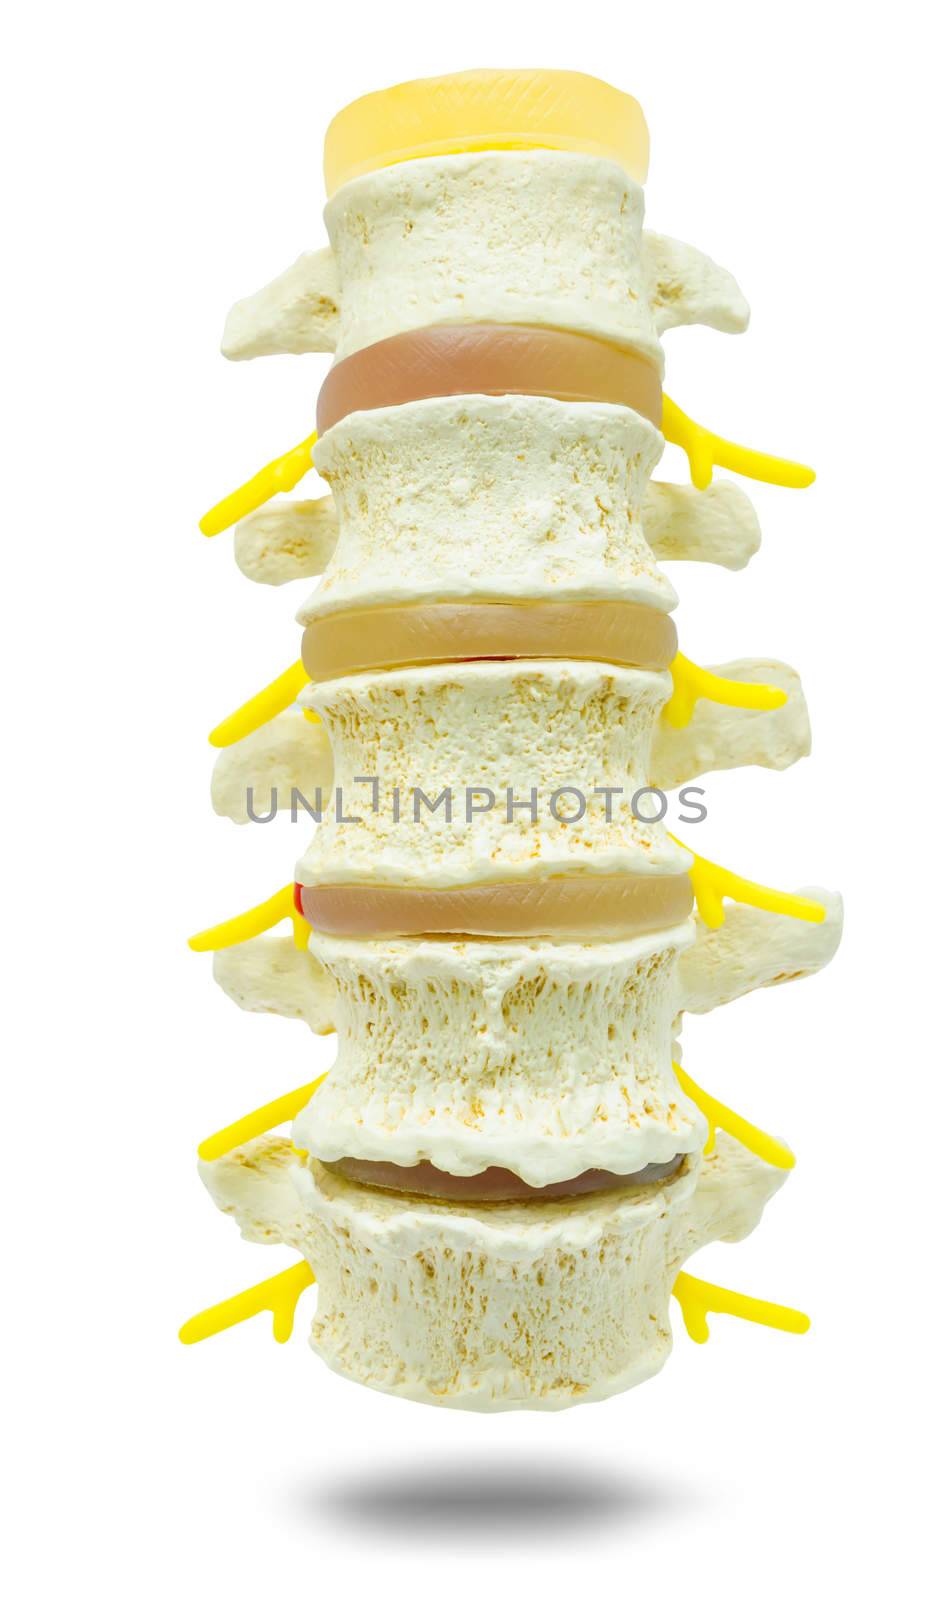 lumbar part of a spine preparation for study medical over white background. clipping path.